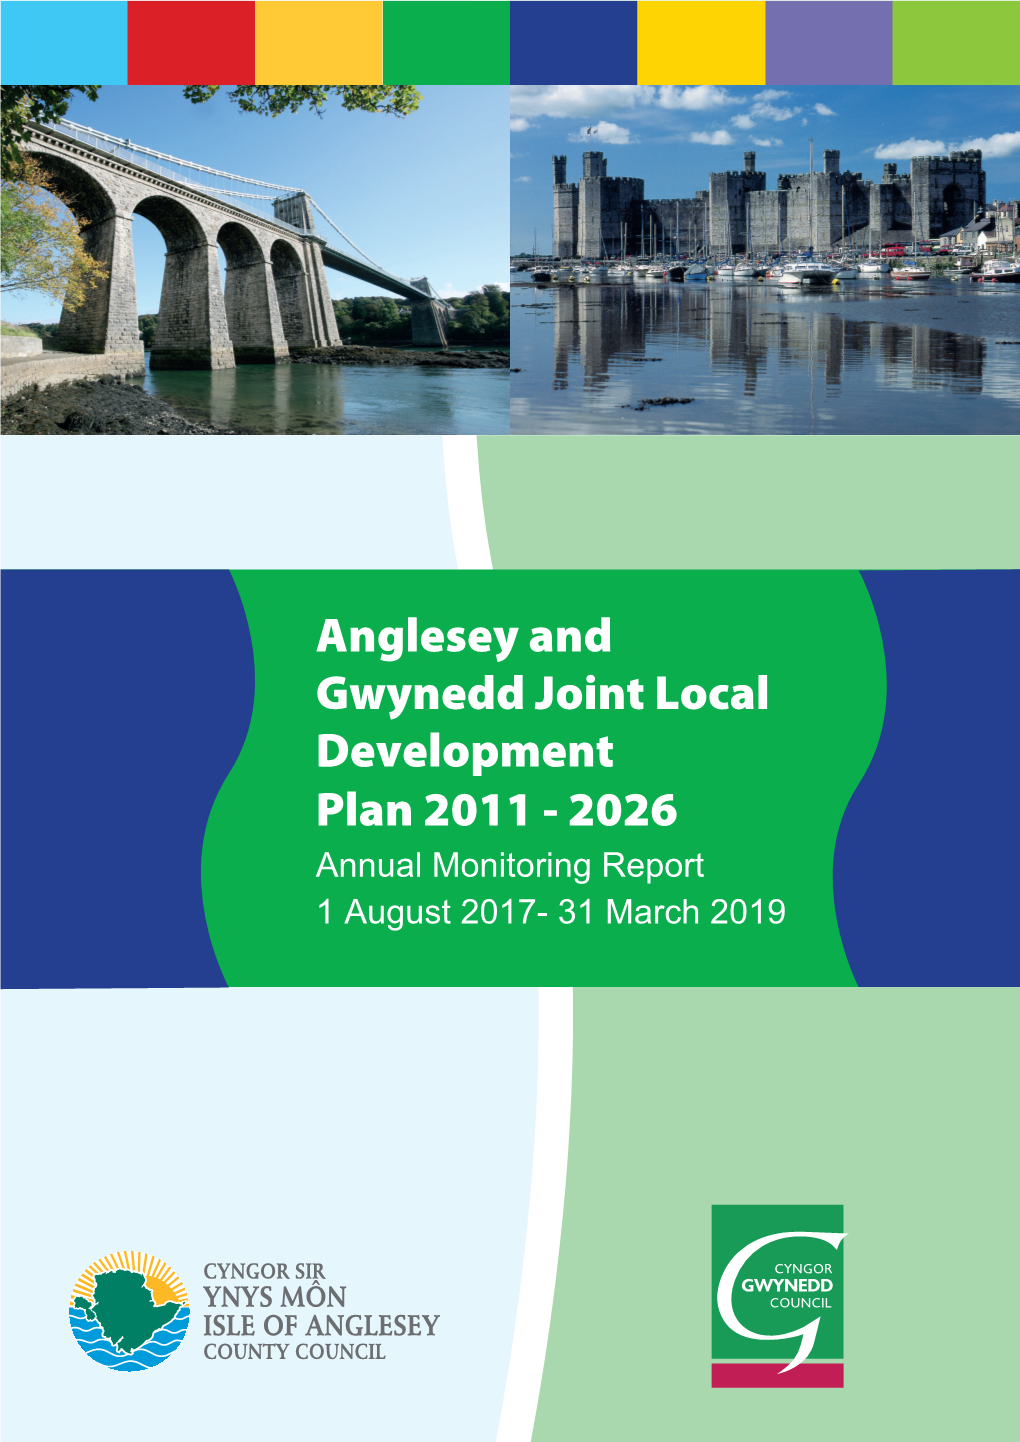 Annual Monitoring Report 1 August 2017­ 31 March 2019 Anglesey and Gwynedd Joint Local Development Plan 2011-2026